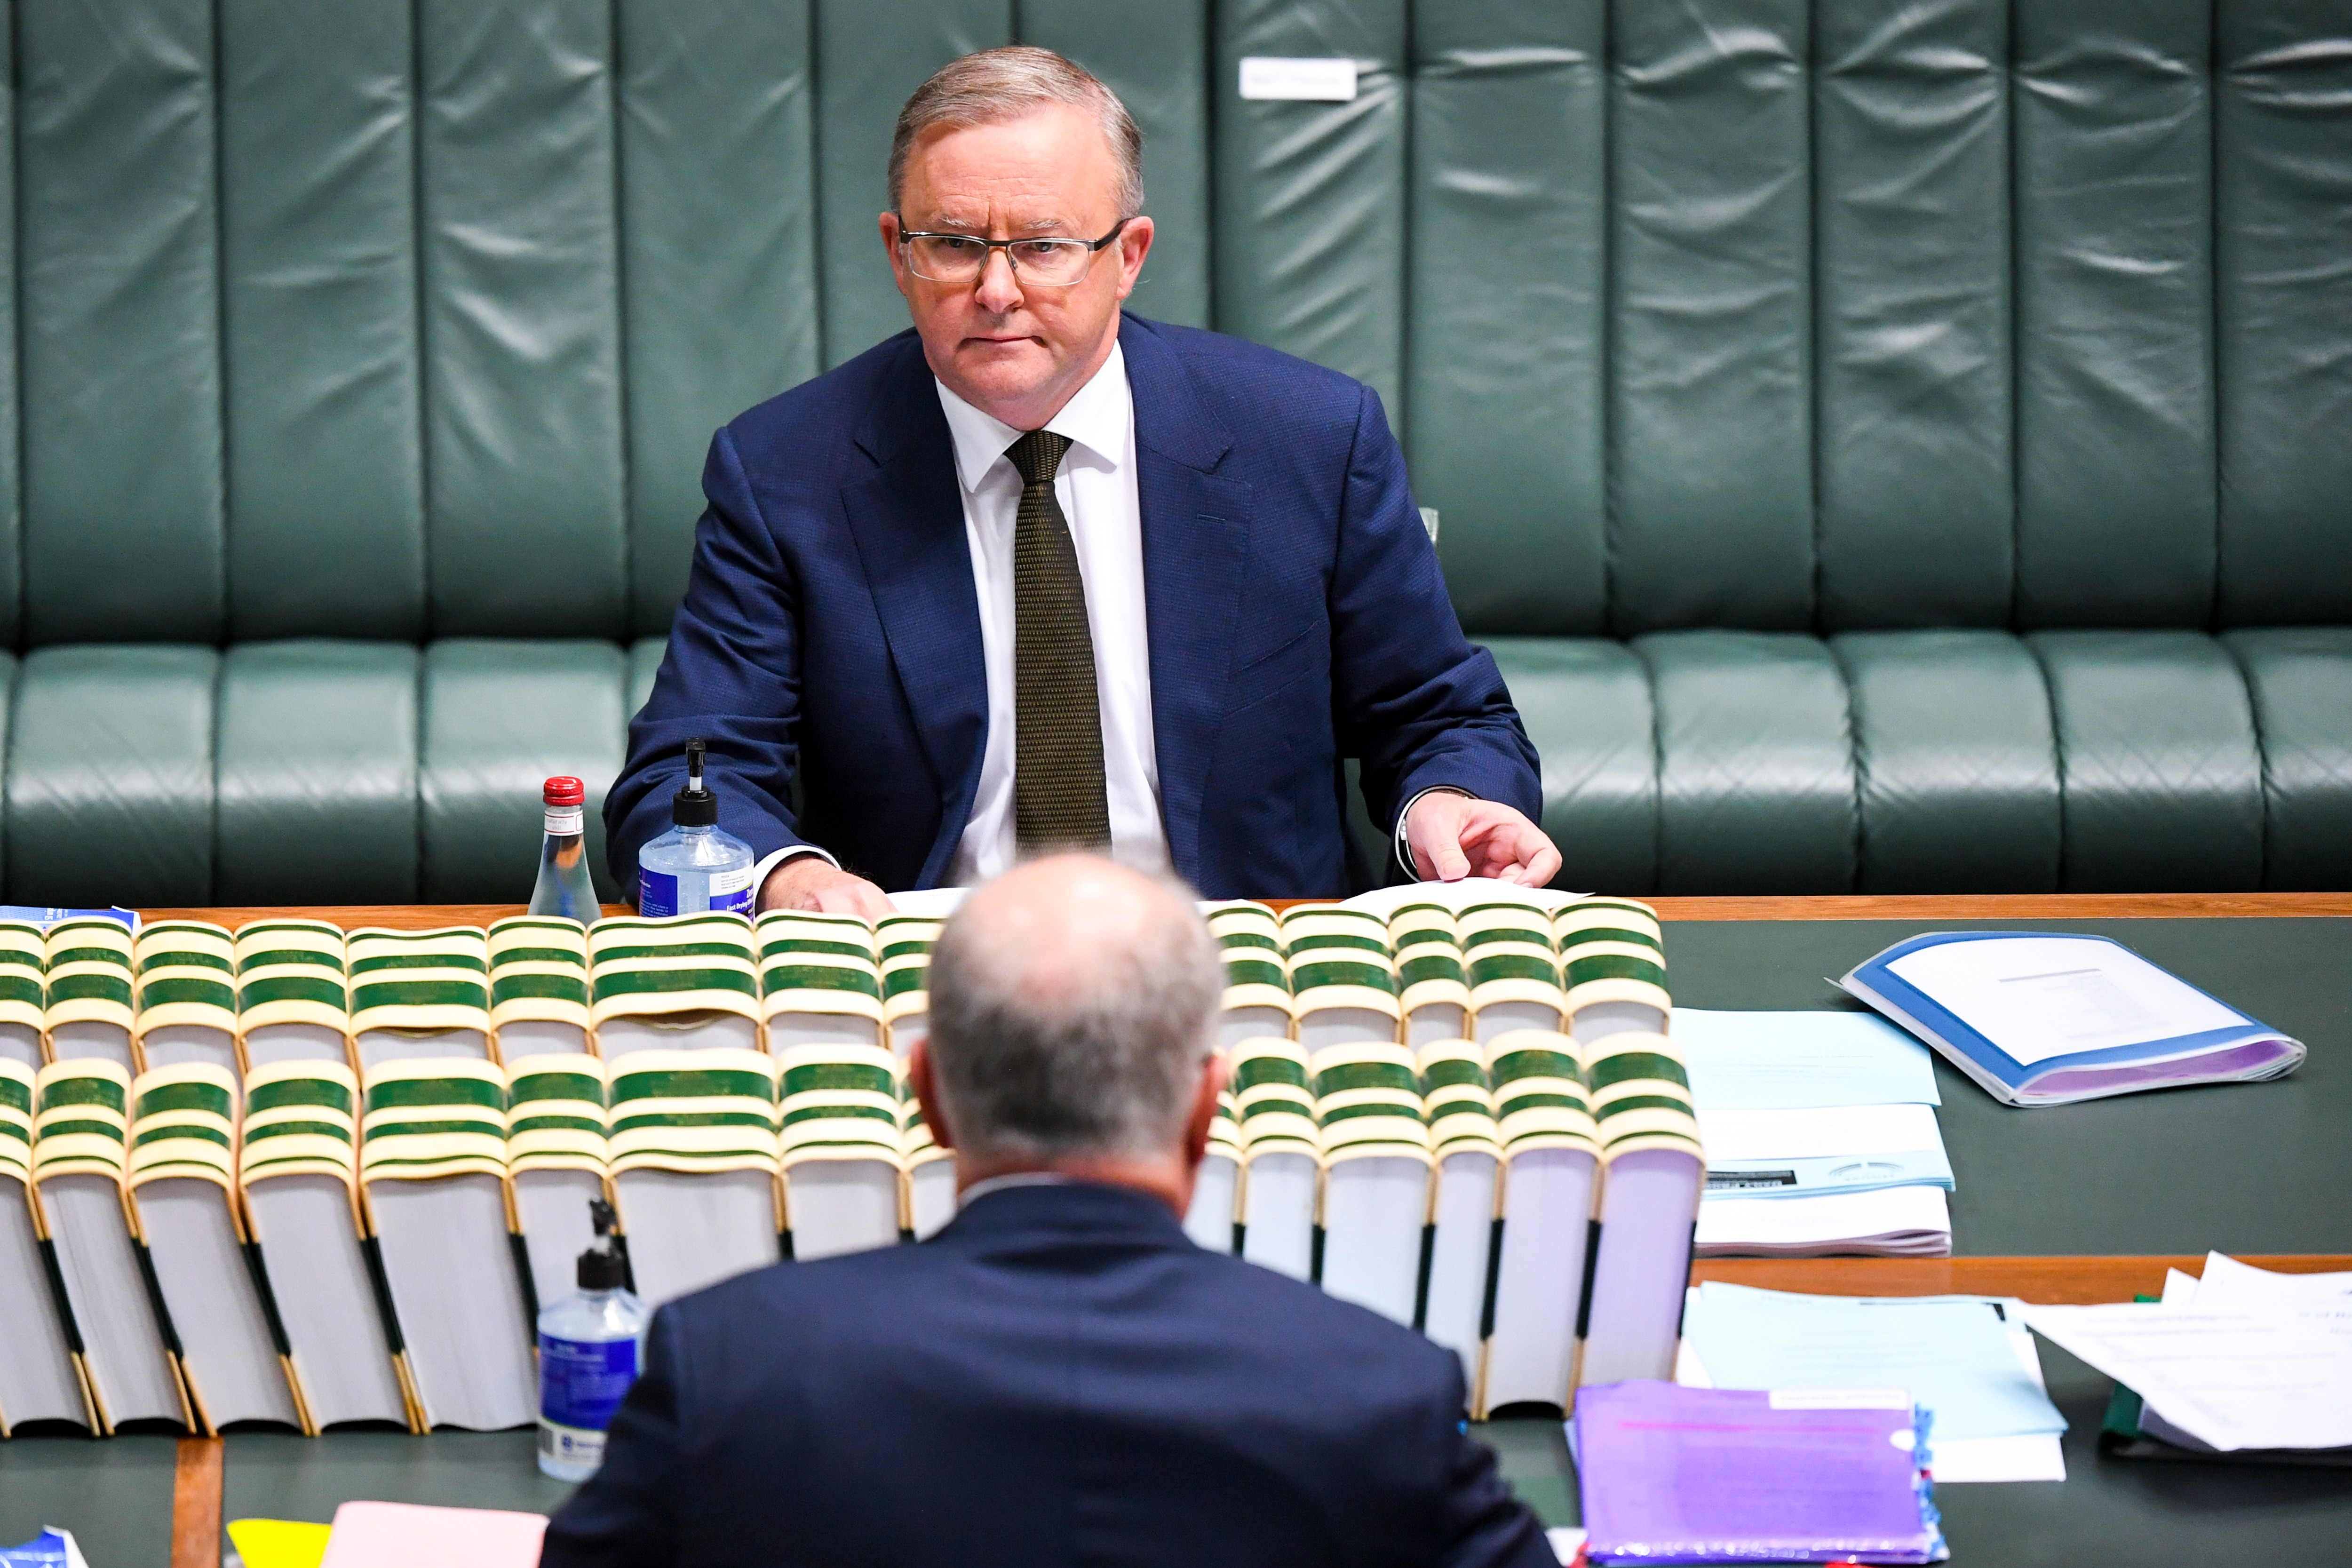 Federal Labor leader Anthony Albanese.